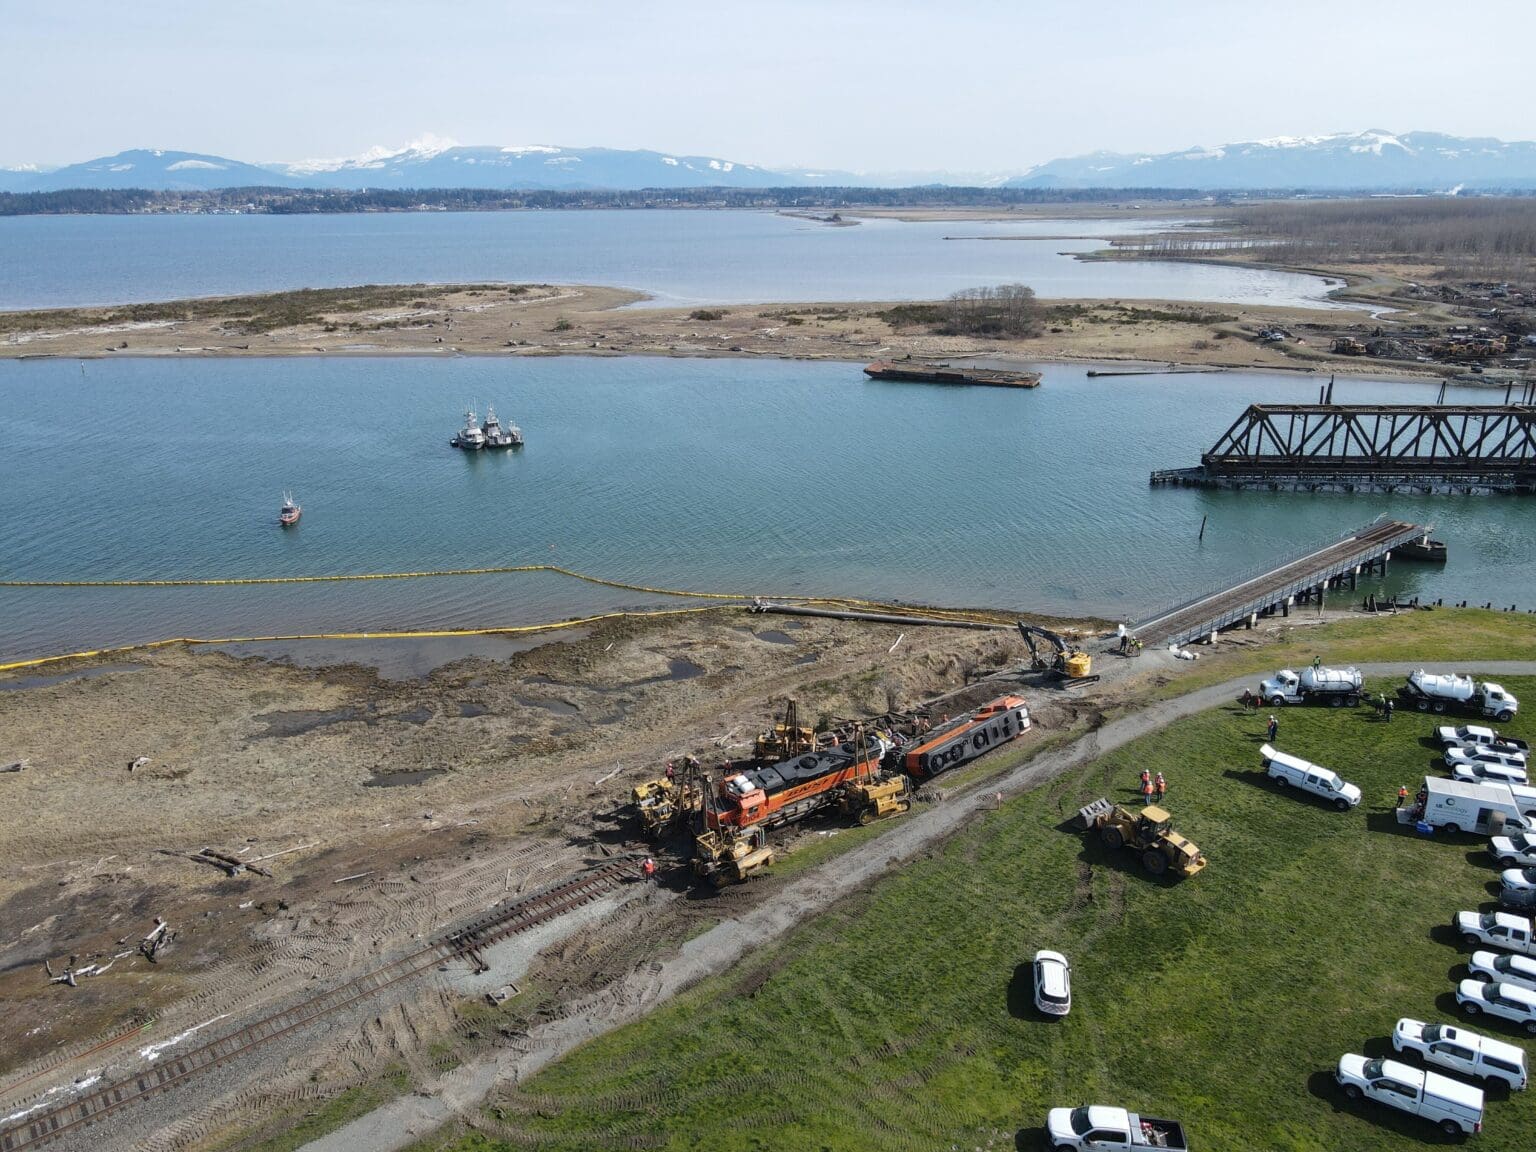 Crews work to remove a pair of Burlington Northern Santa Fe locomotives that derailed on the Swinomish Reservation in Skagit County on March 16. The photo won first place in the breaking news photo category of the Washington Newspaper Association 2023 Better Newspaper Contest.